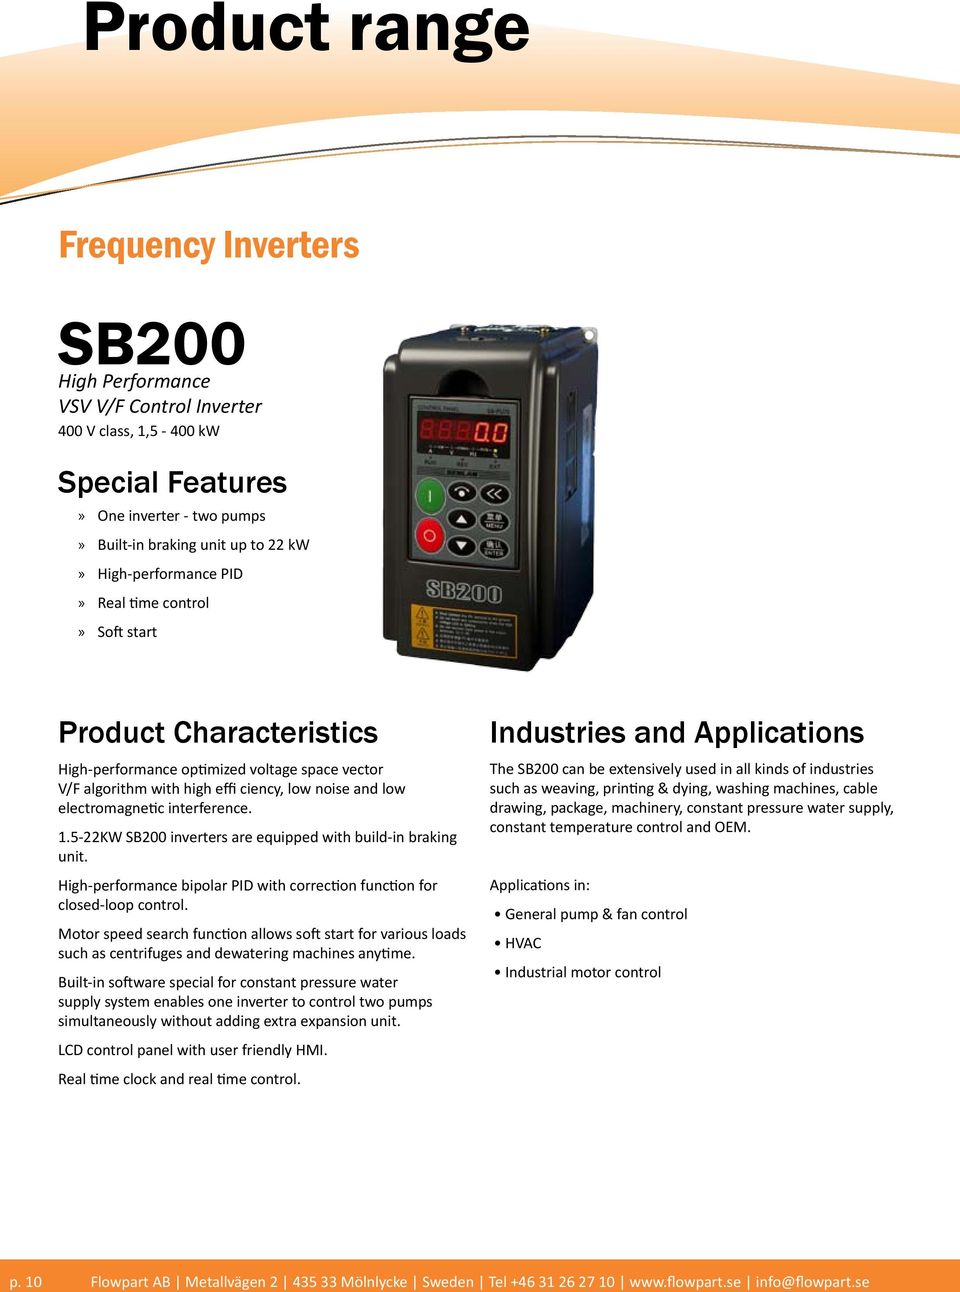 interference. 1.5-22KW SB200 inverters are equipped with build-in braking unit. High-performance bipolar PID with correction function for closed-loop control.